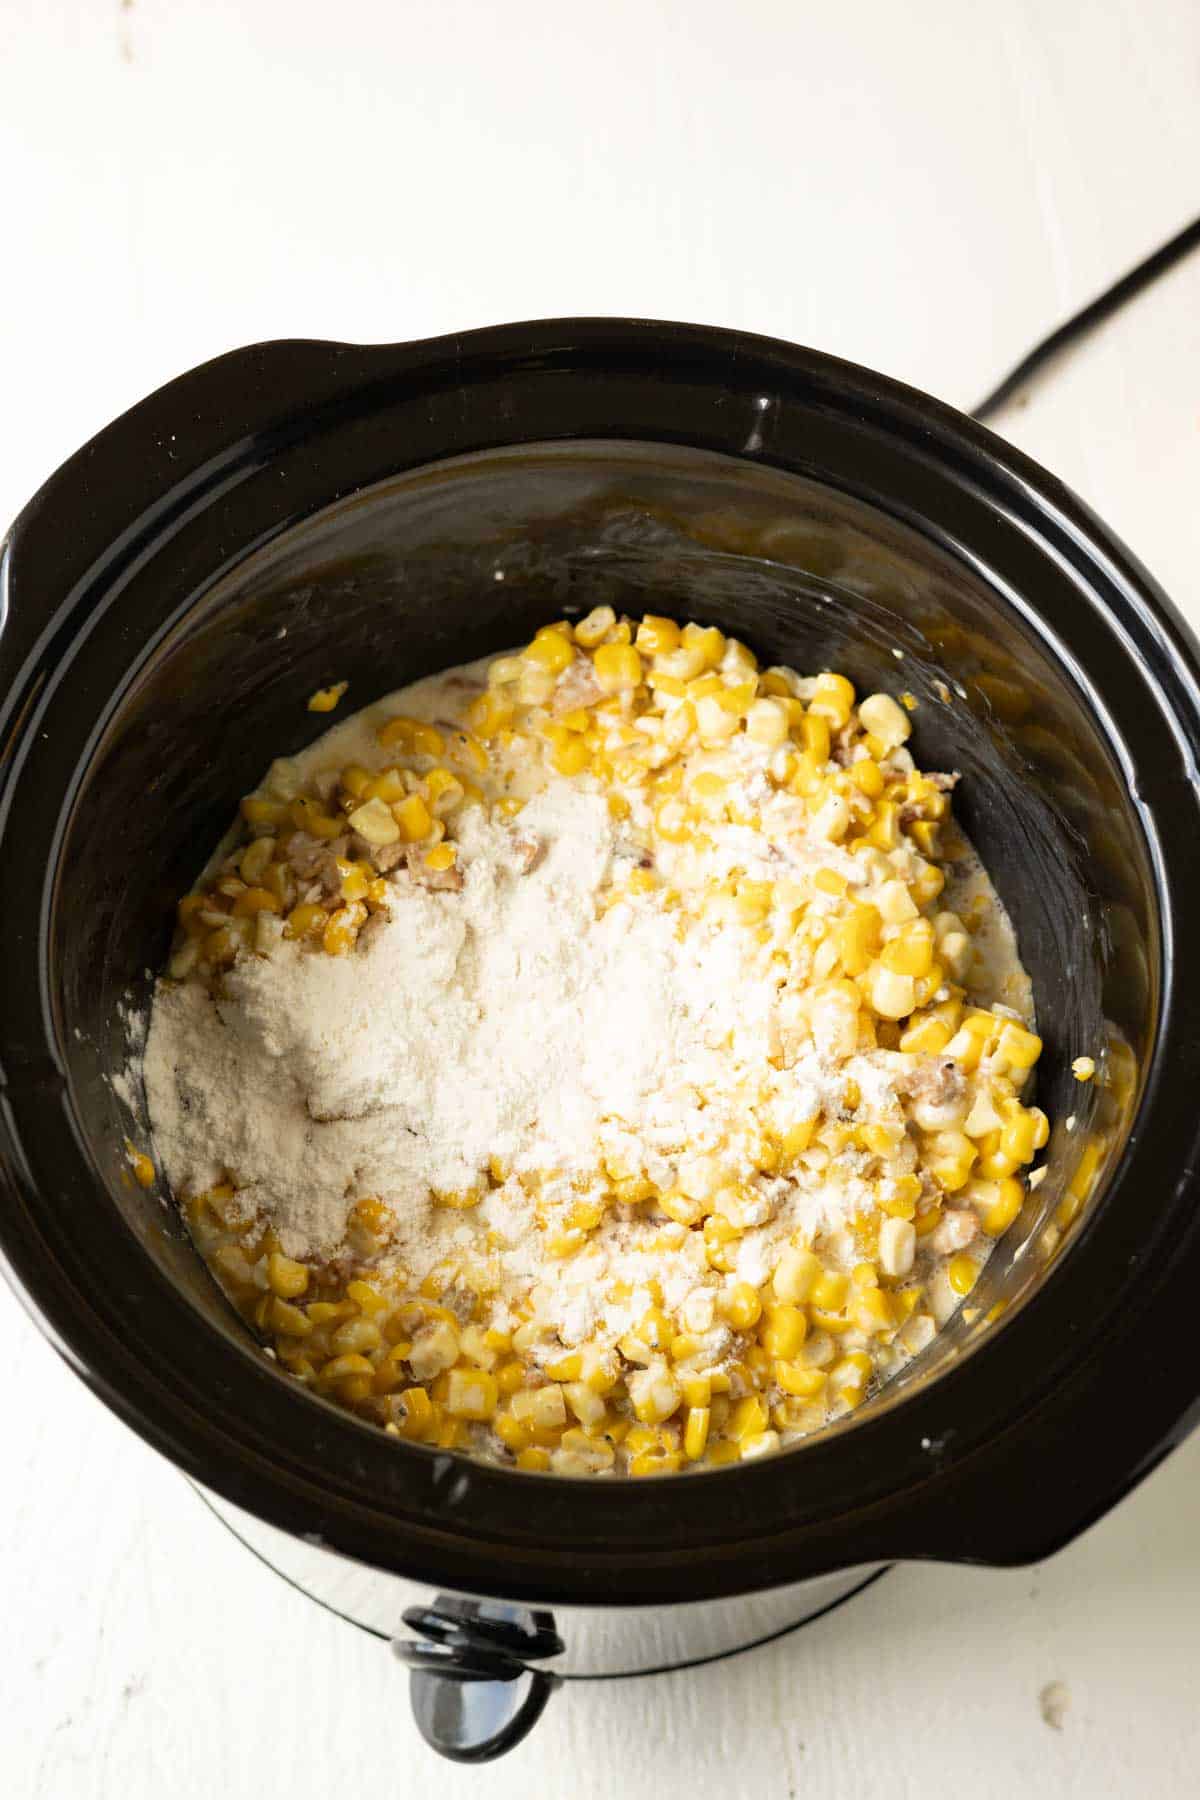 Cheesy corn in a slow cooker with flour sprinkled over the top.